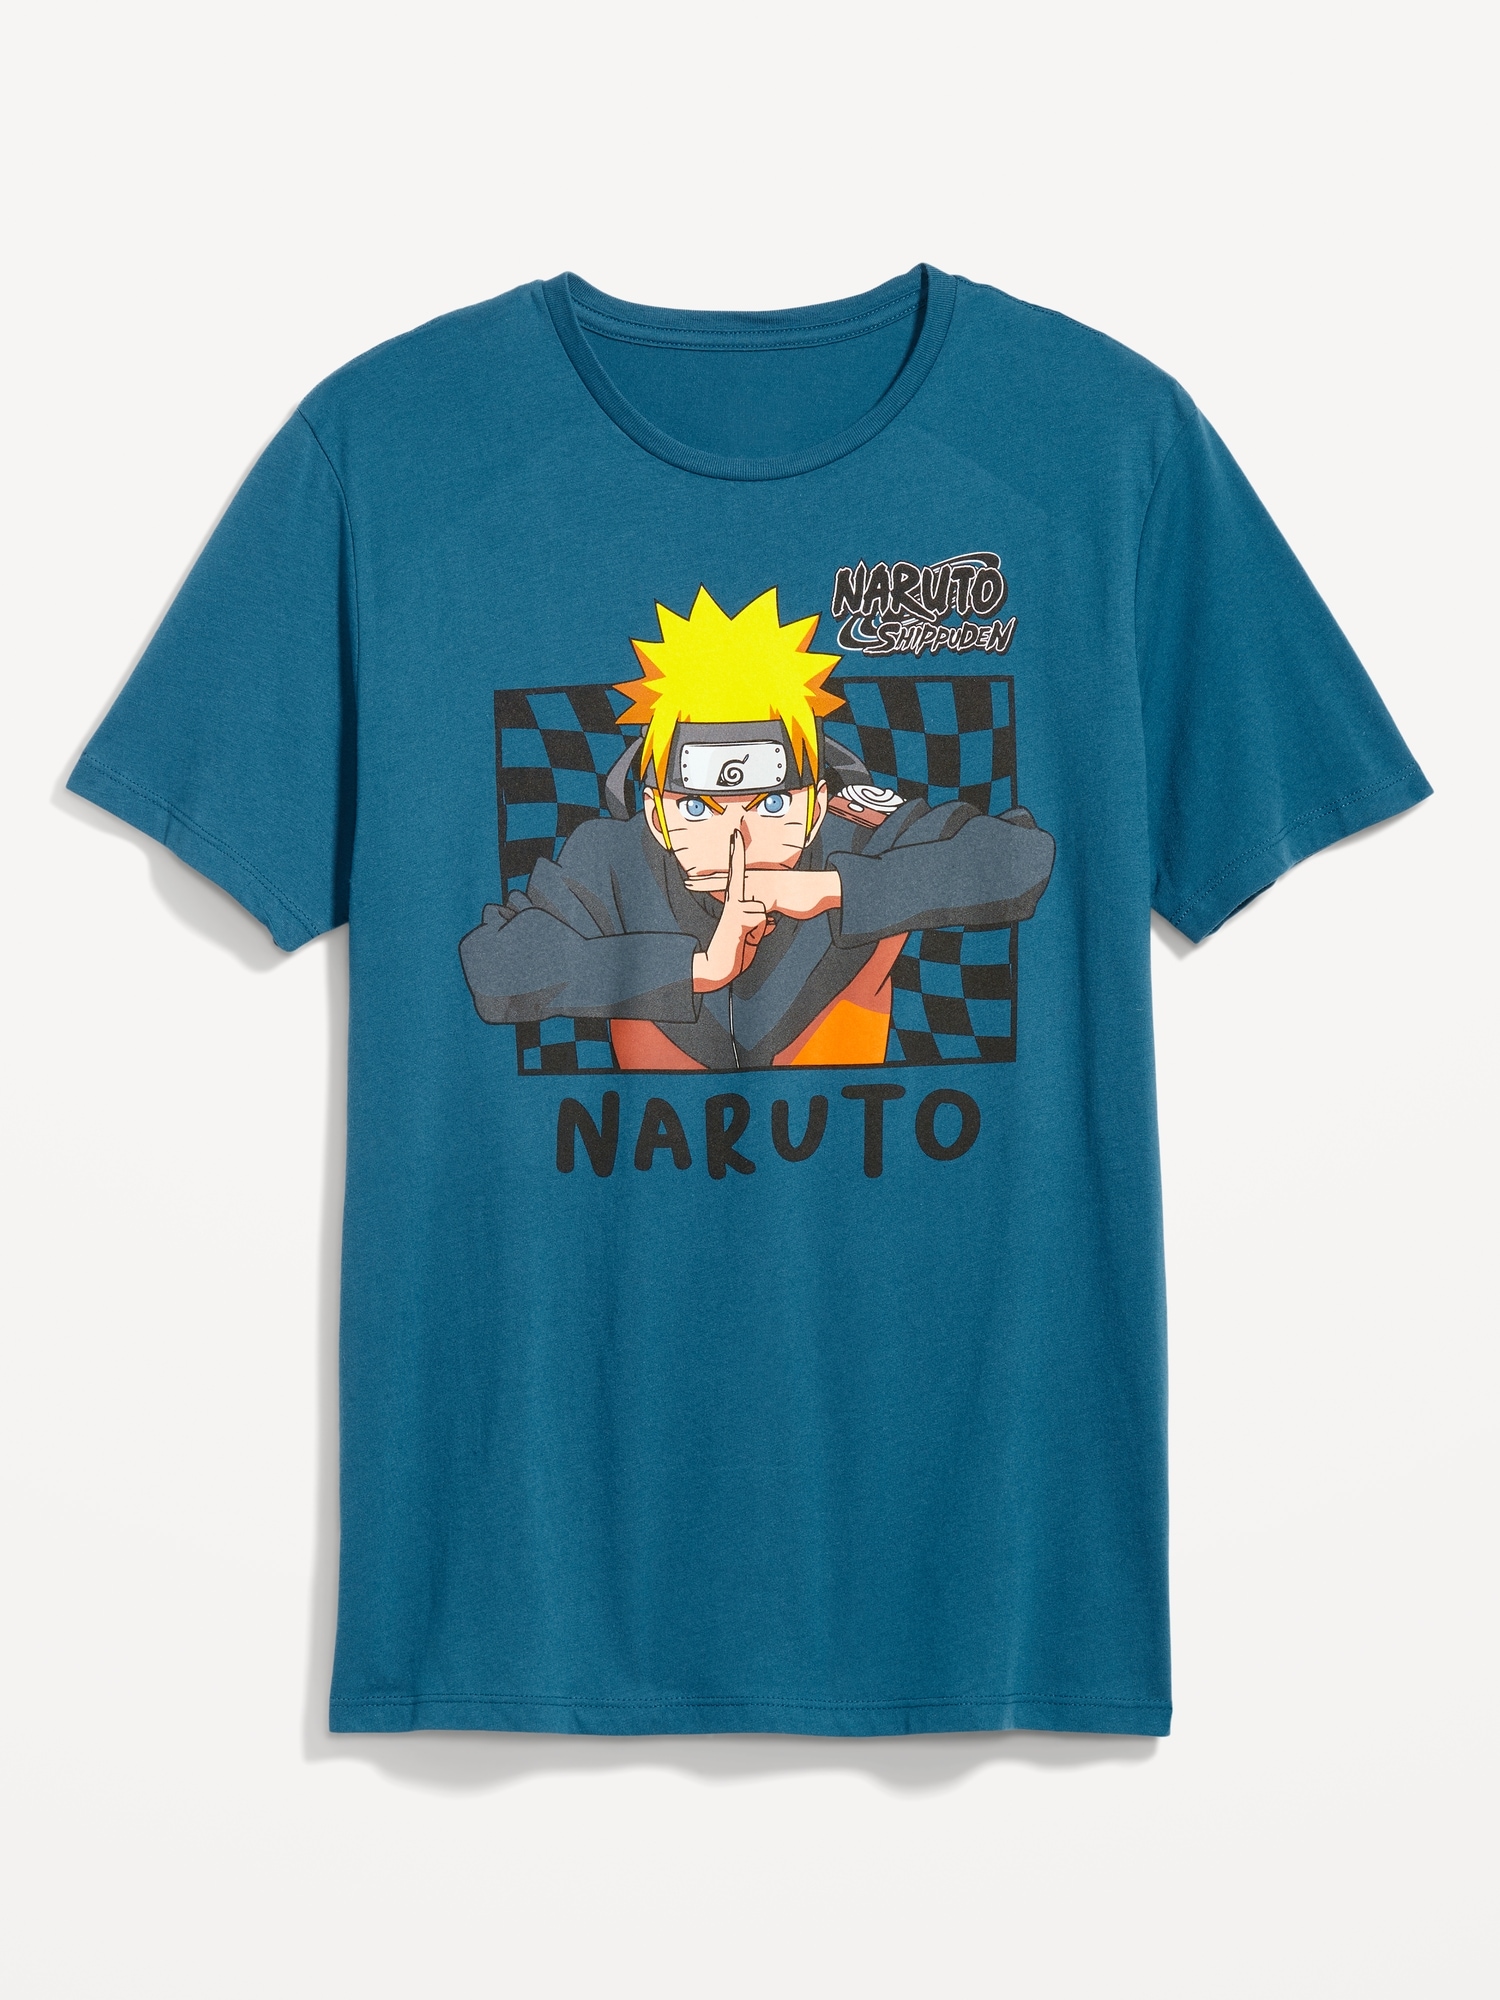 Naruto: Shippuden™ Gender-Neutral T-Shirt for Adults | Navy